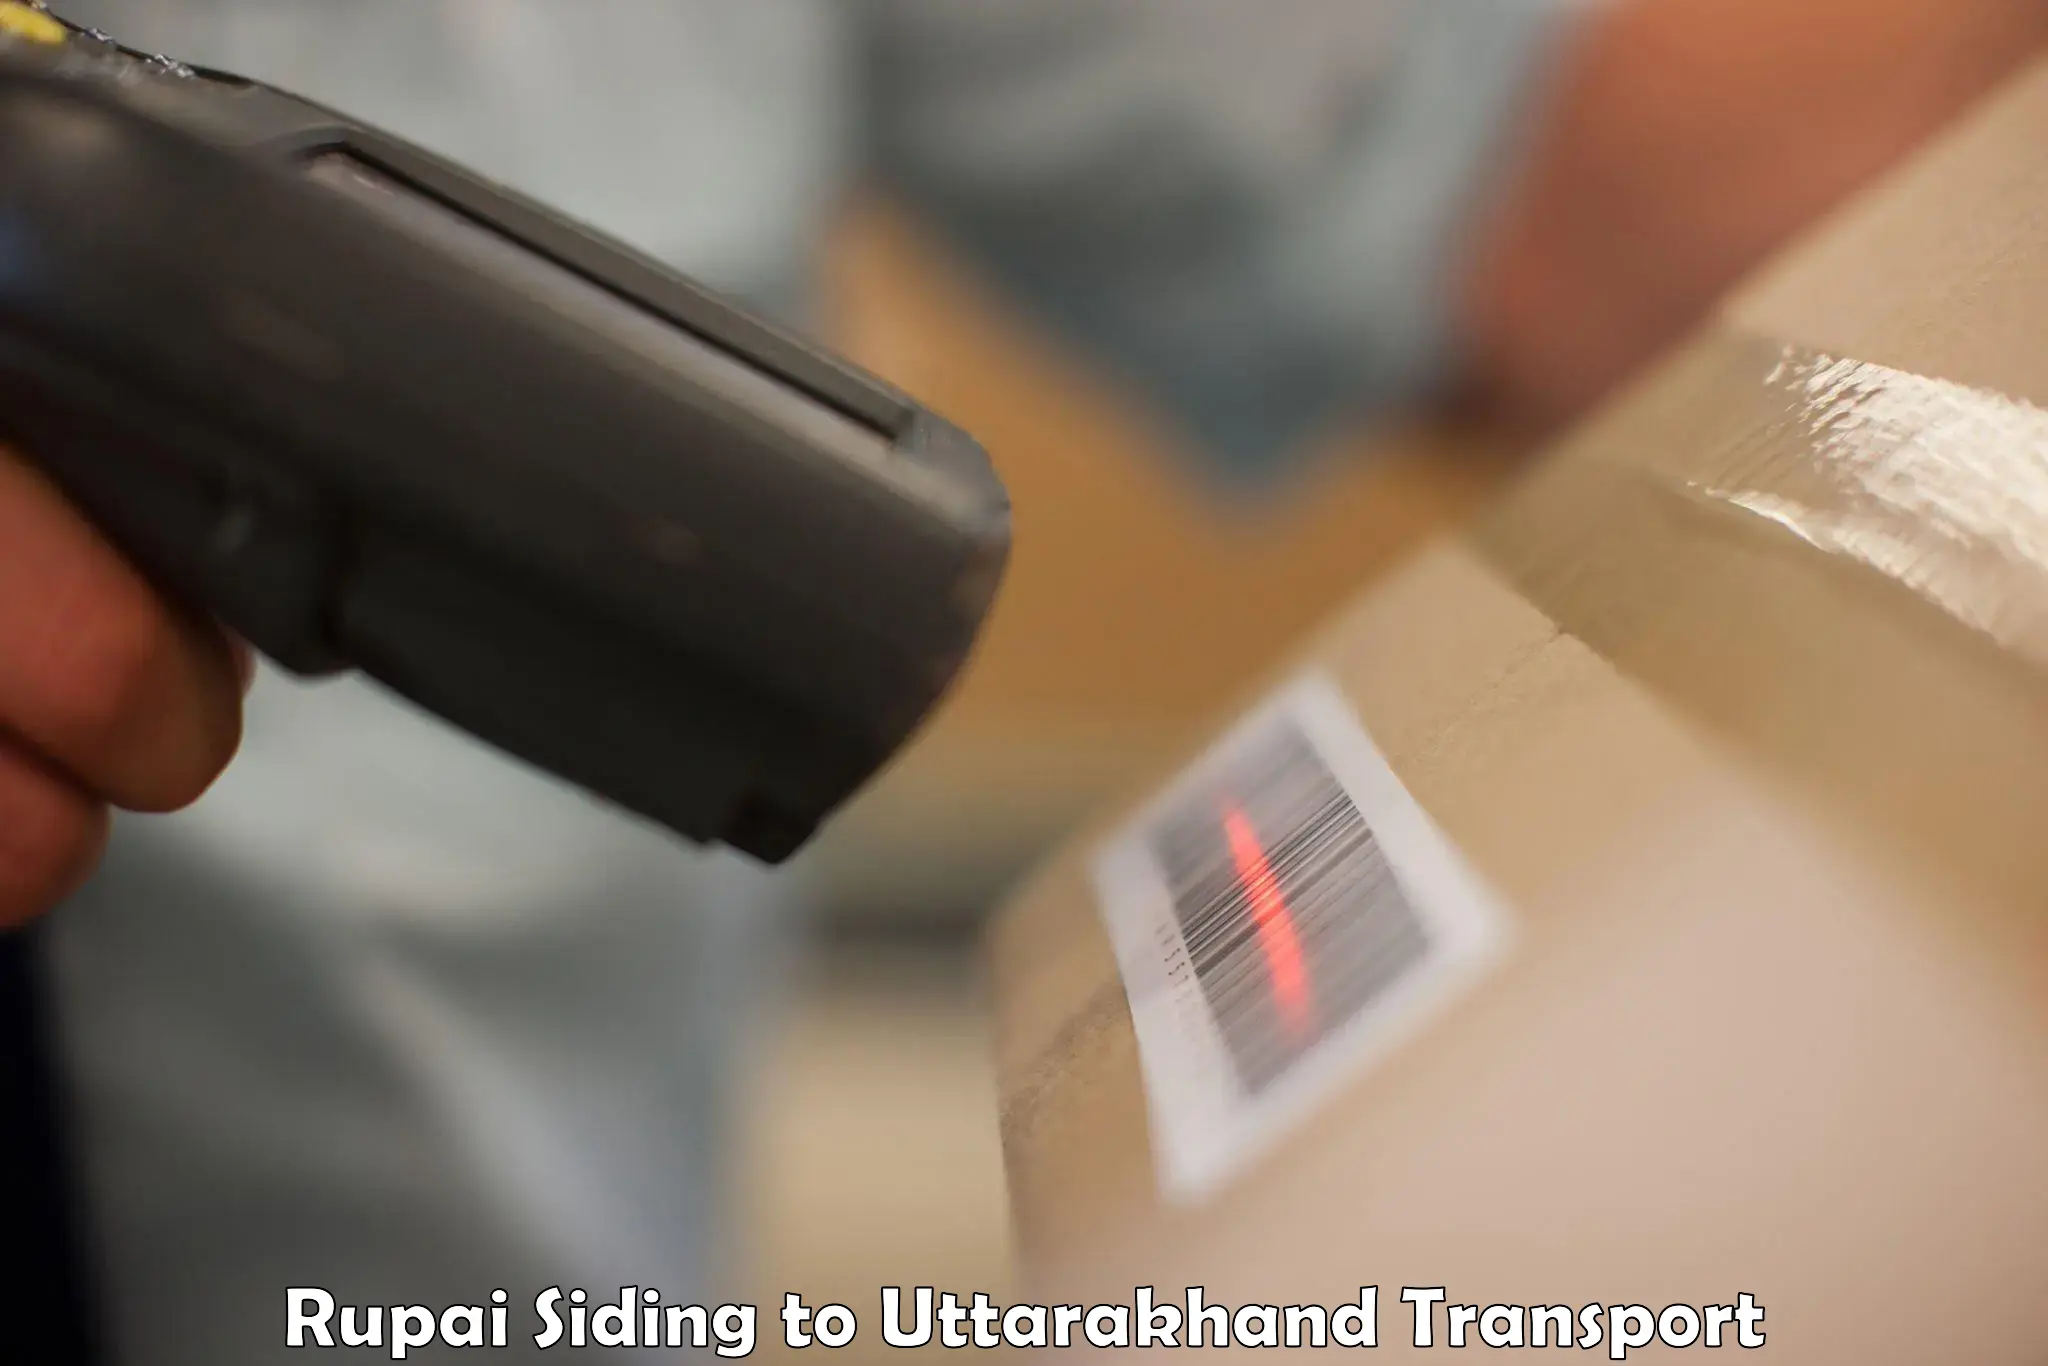 Truck transport companies in India Rupai Siding to Champawat